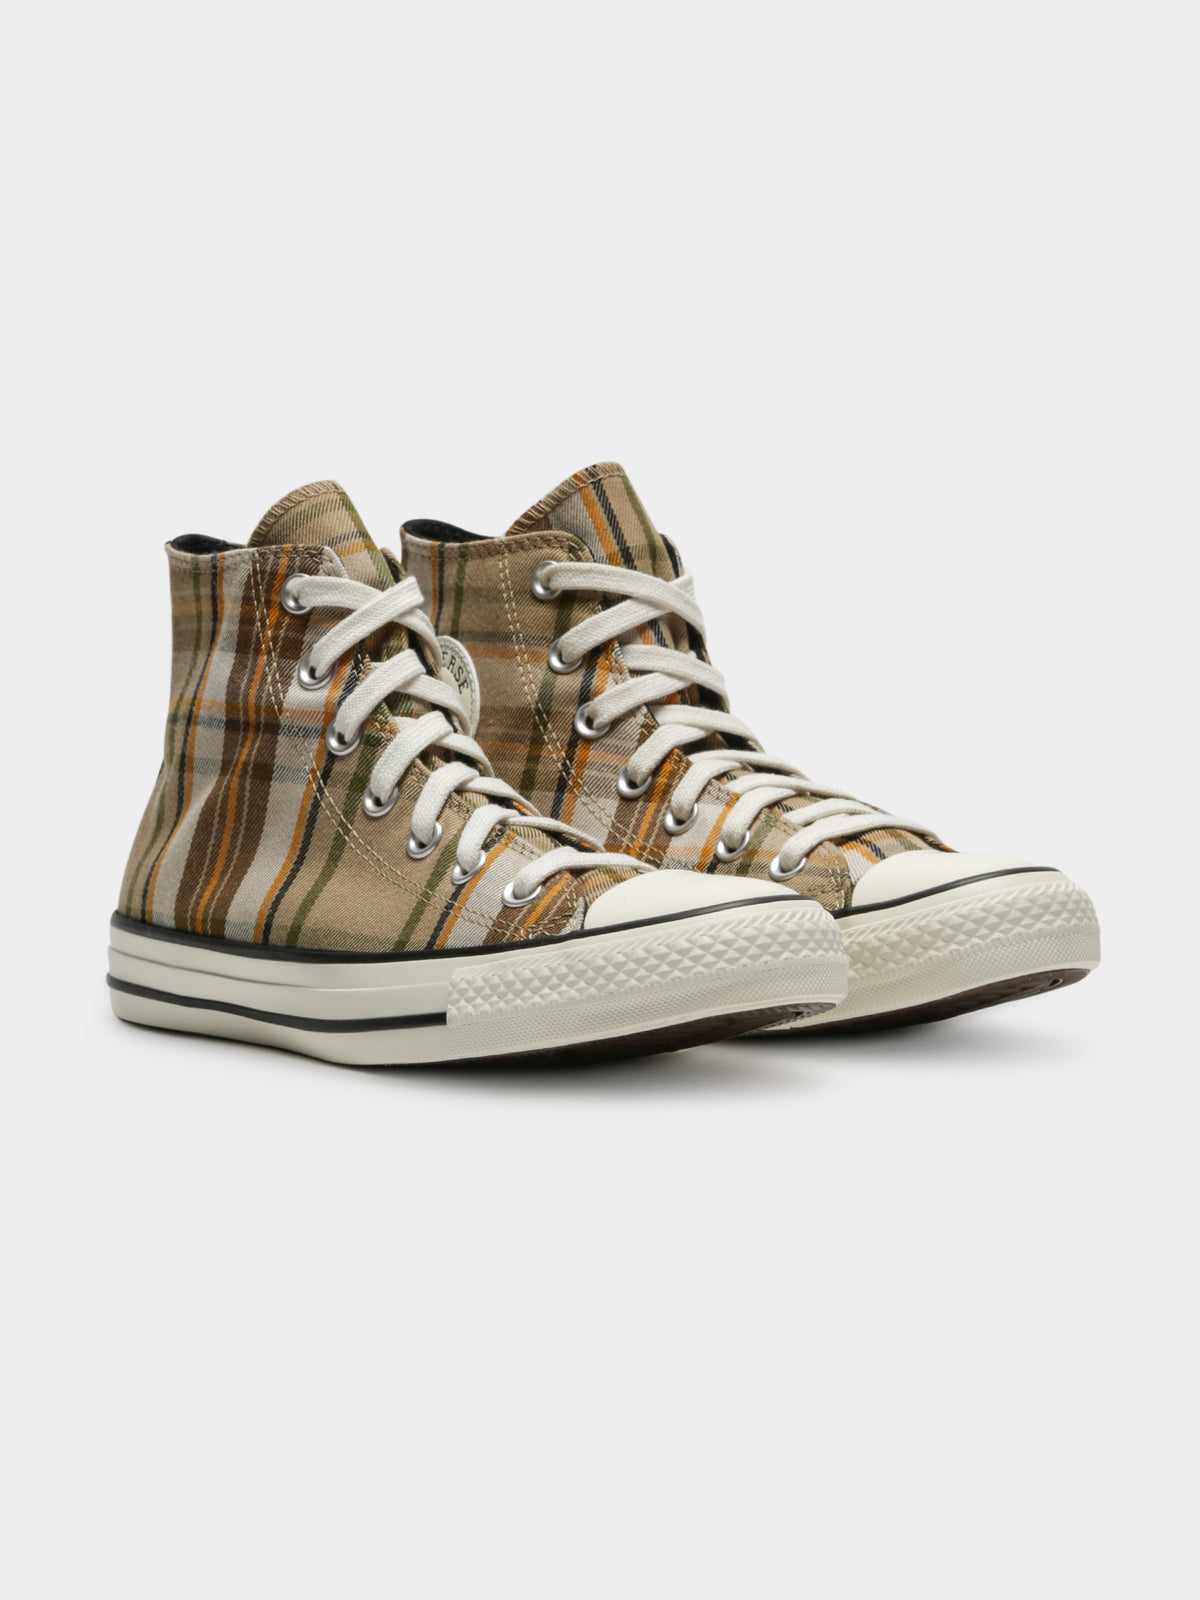 Womens Chuck Taylor All Star Mix &amp; Match High Top Sneakers in Nomad Khaki